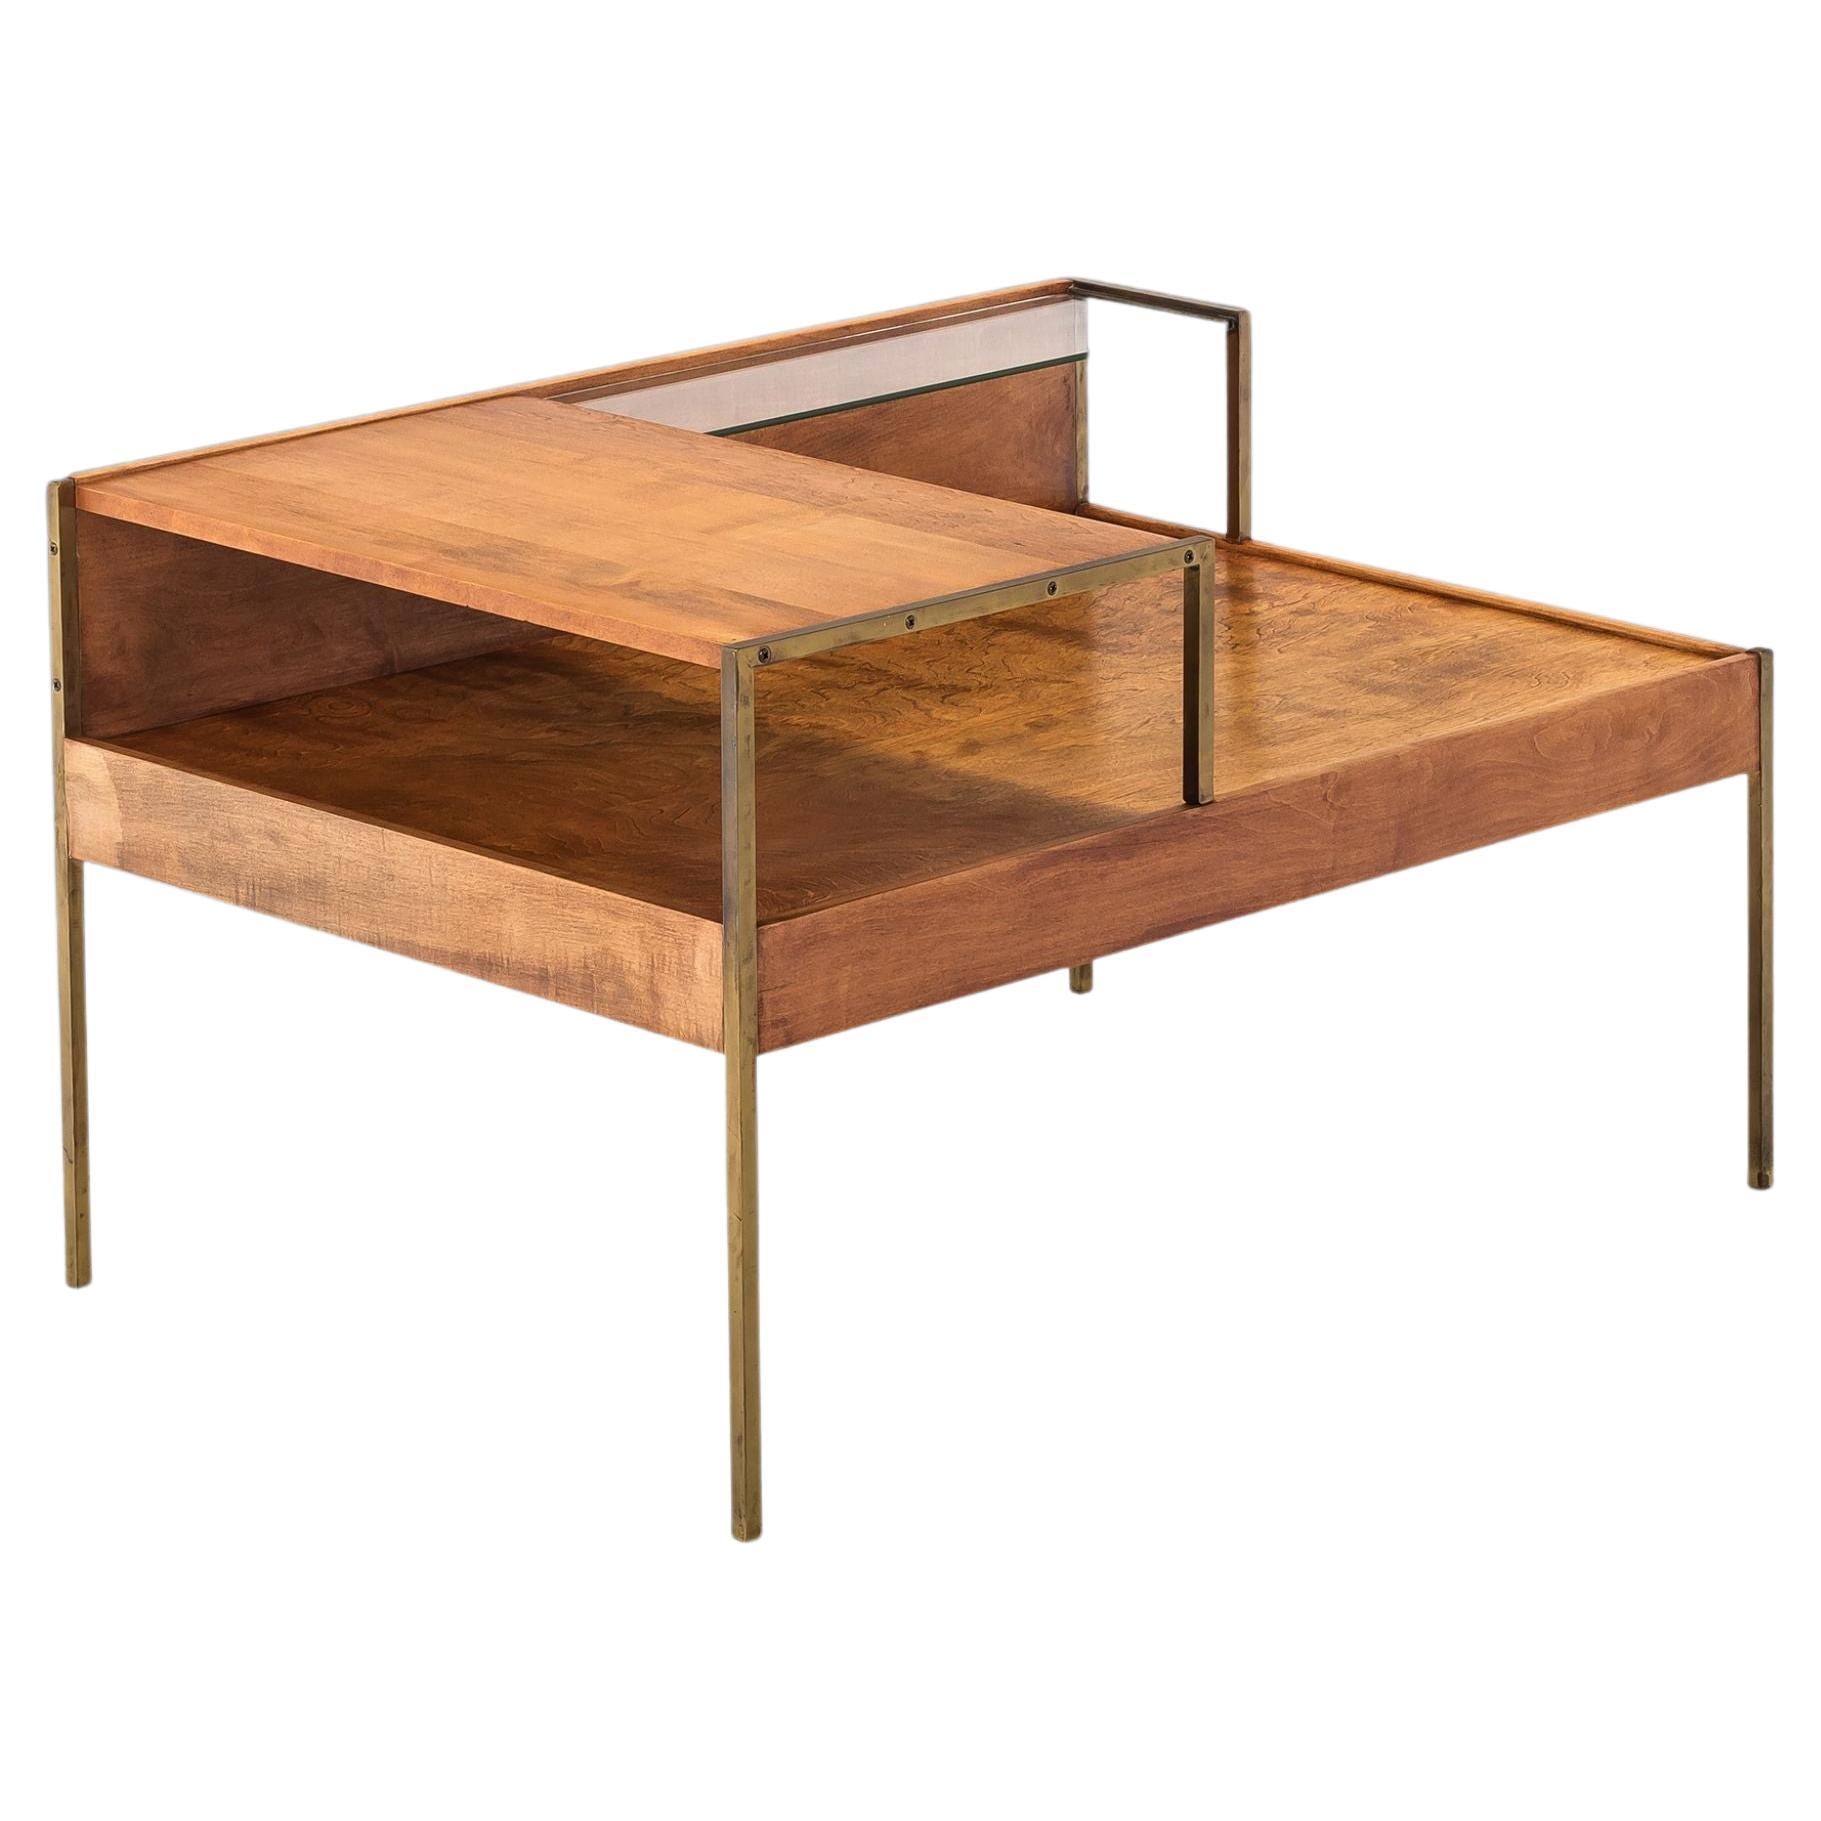 Milo Baughman for Murray Furniture Maple and Brass Coffee Table, c. 1955 For Sale